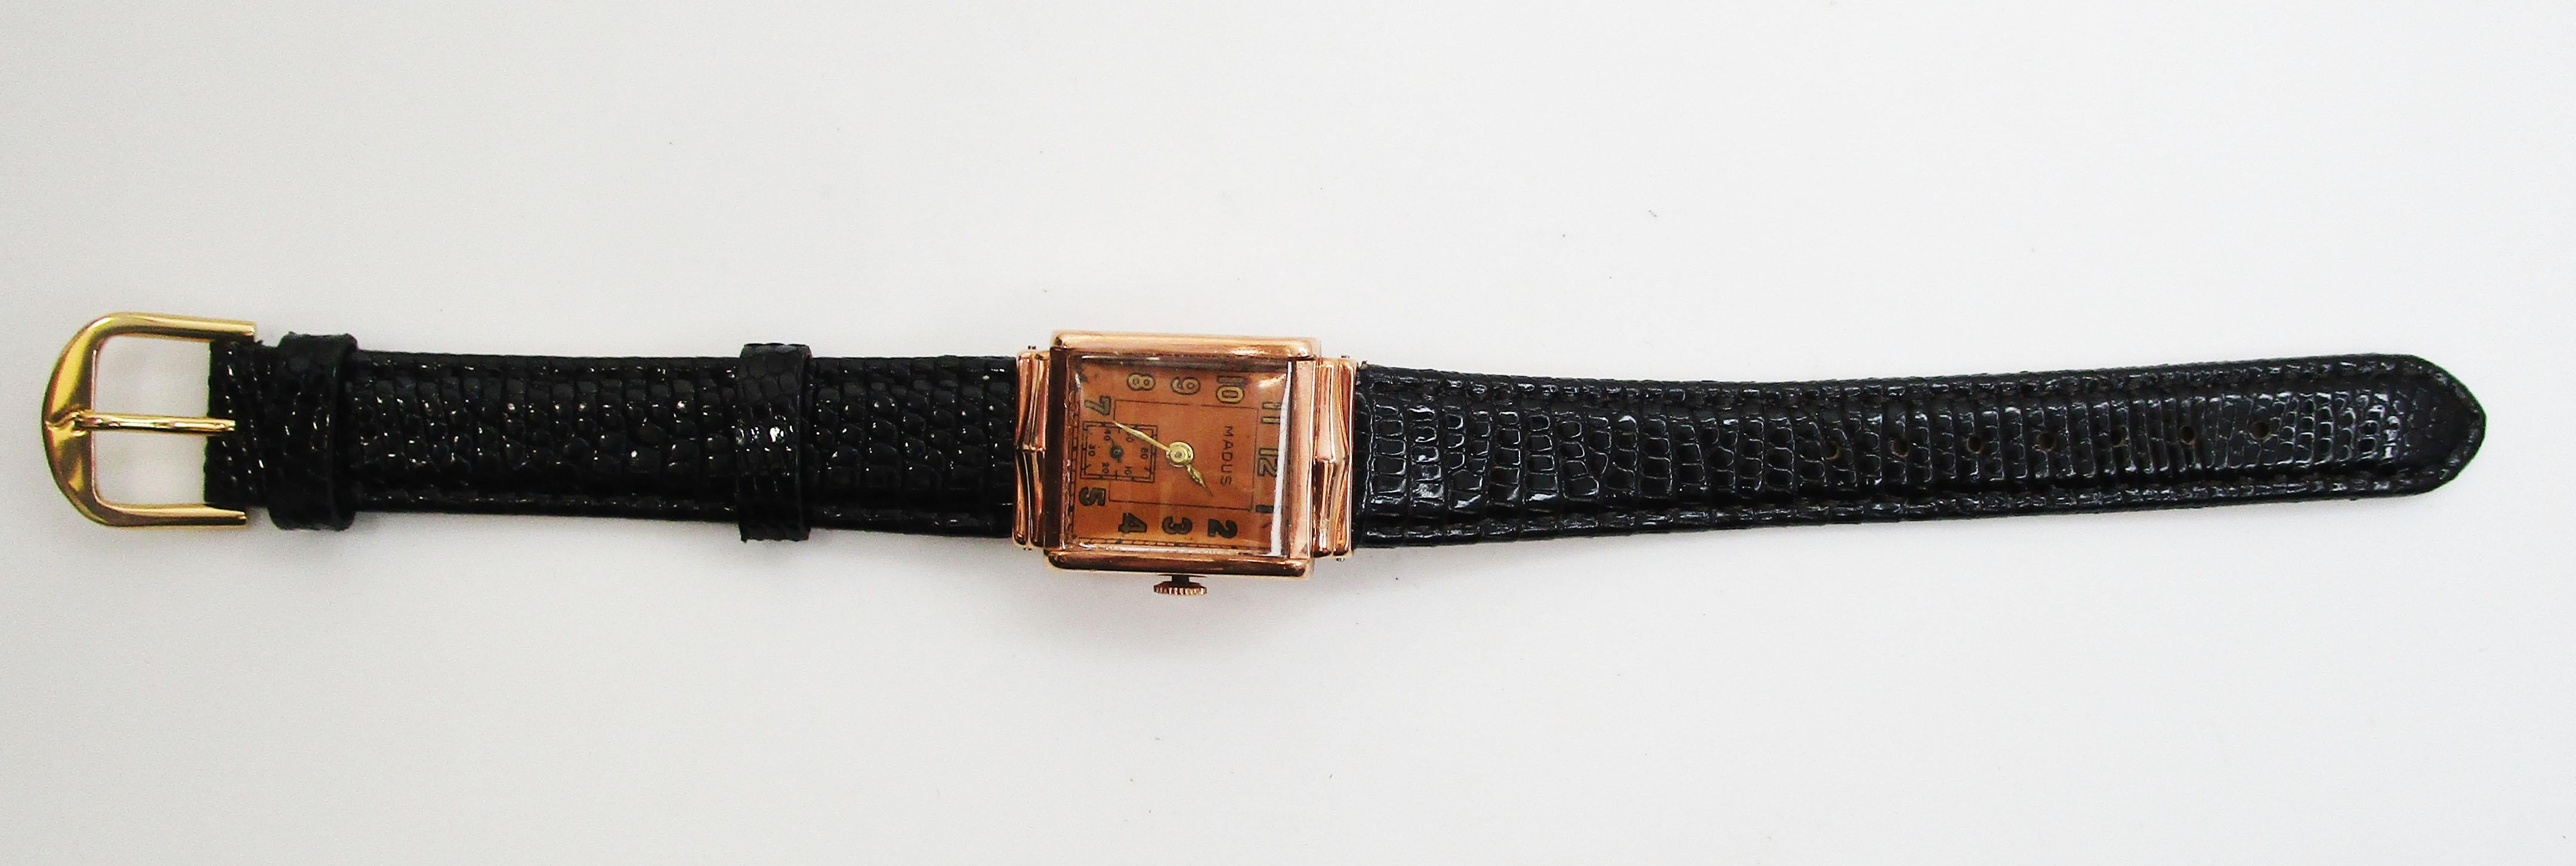 This incredible vintage watch is a 14k rose gold Madus watch with a genuine lizard strap. The watch has a geometric shape. The face is in rose gold to match the 14k rose gold face, creating a bright and bold final look with a definitive rose gold